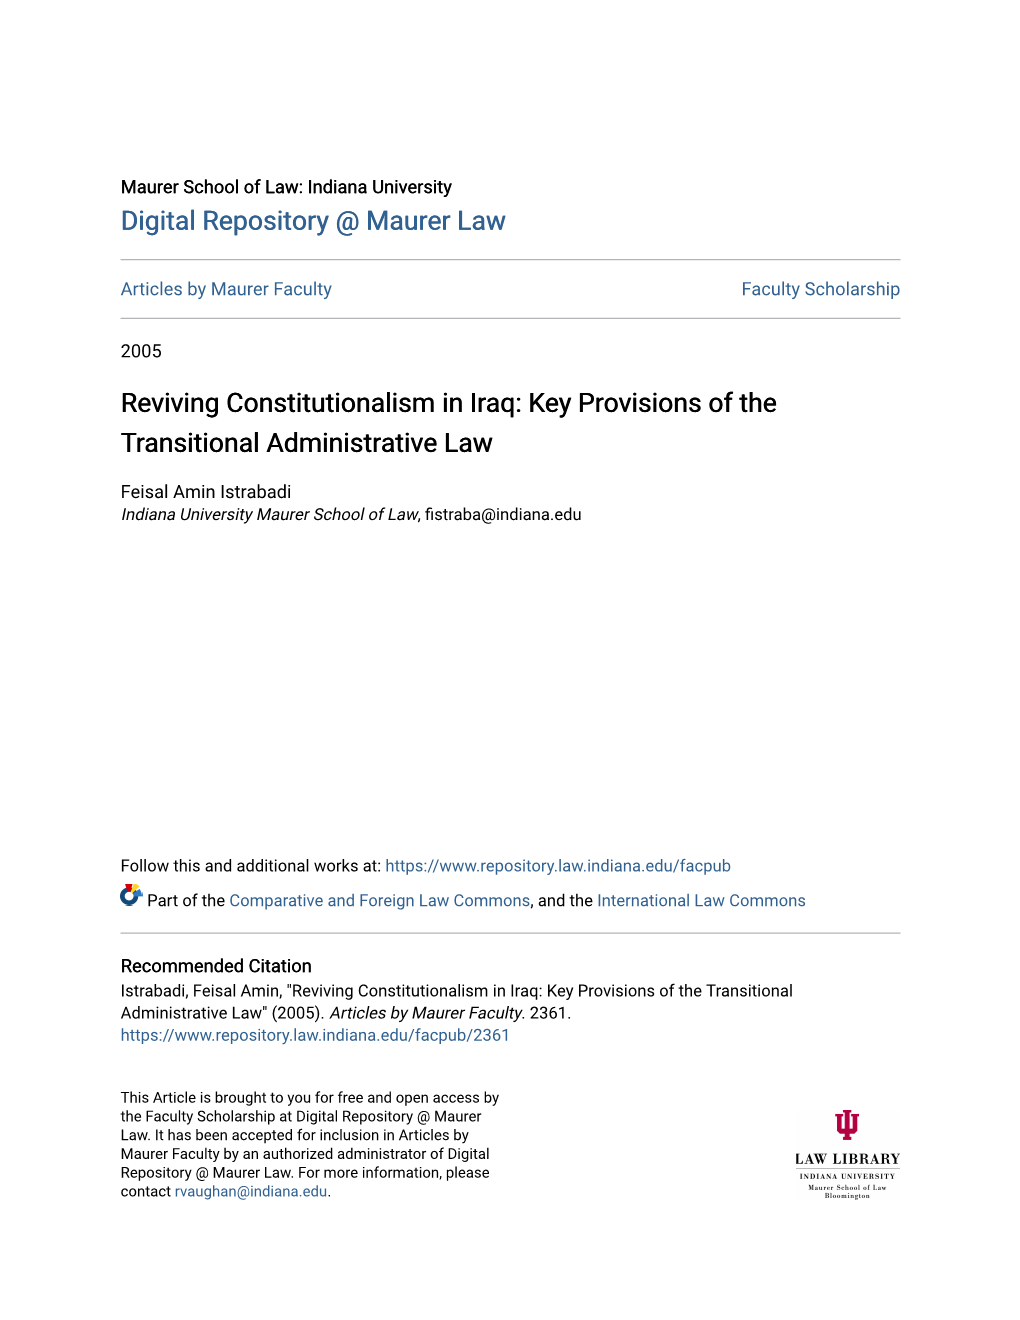 Reviving Constitutionalism in Iraq: Key Provisions of the Transitional Administrative Law